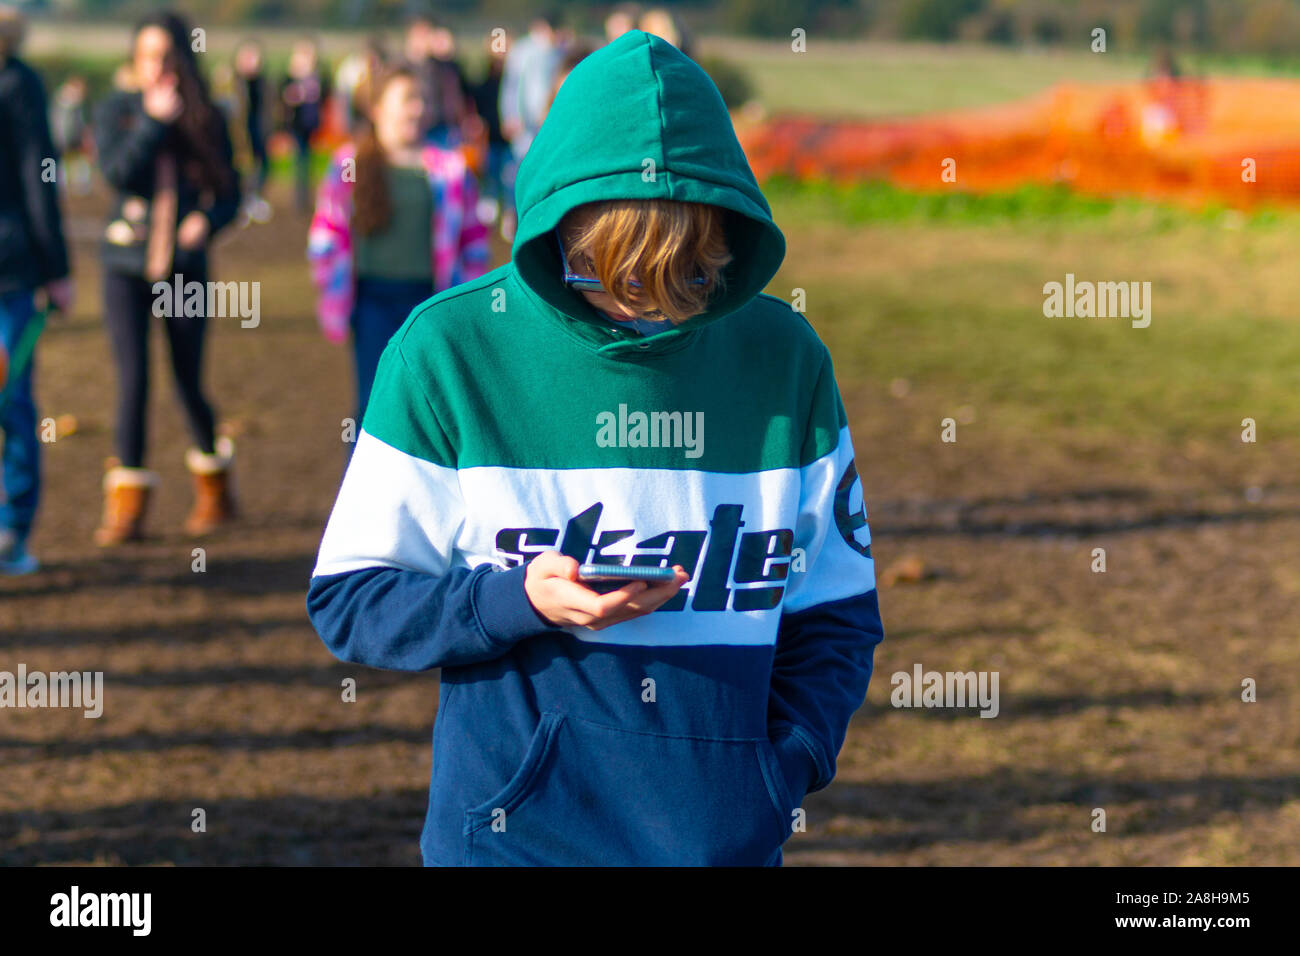 A field of pumpkins at halloween time. A teenage boy is oblivious to his surroundings and engrossed on his iphone Stock Photo